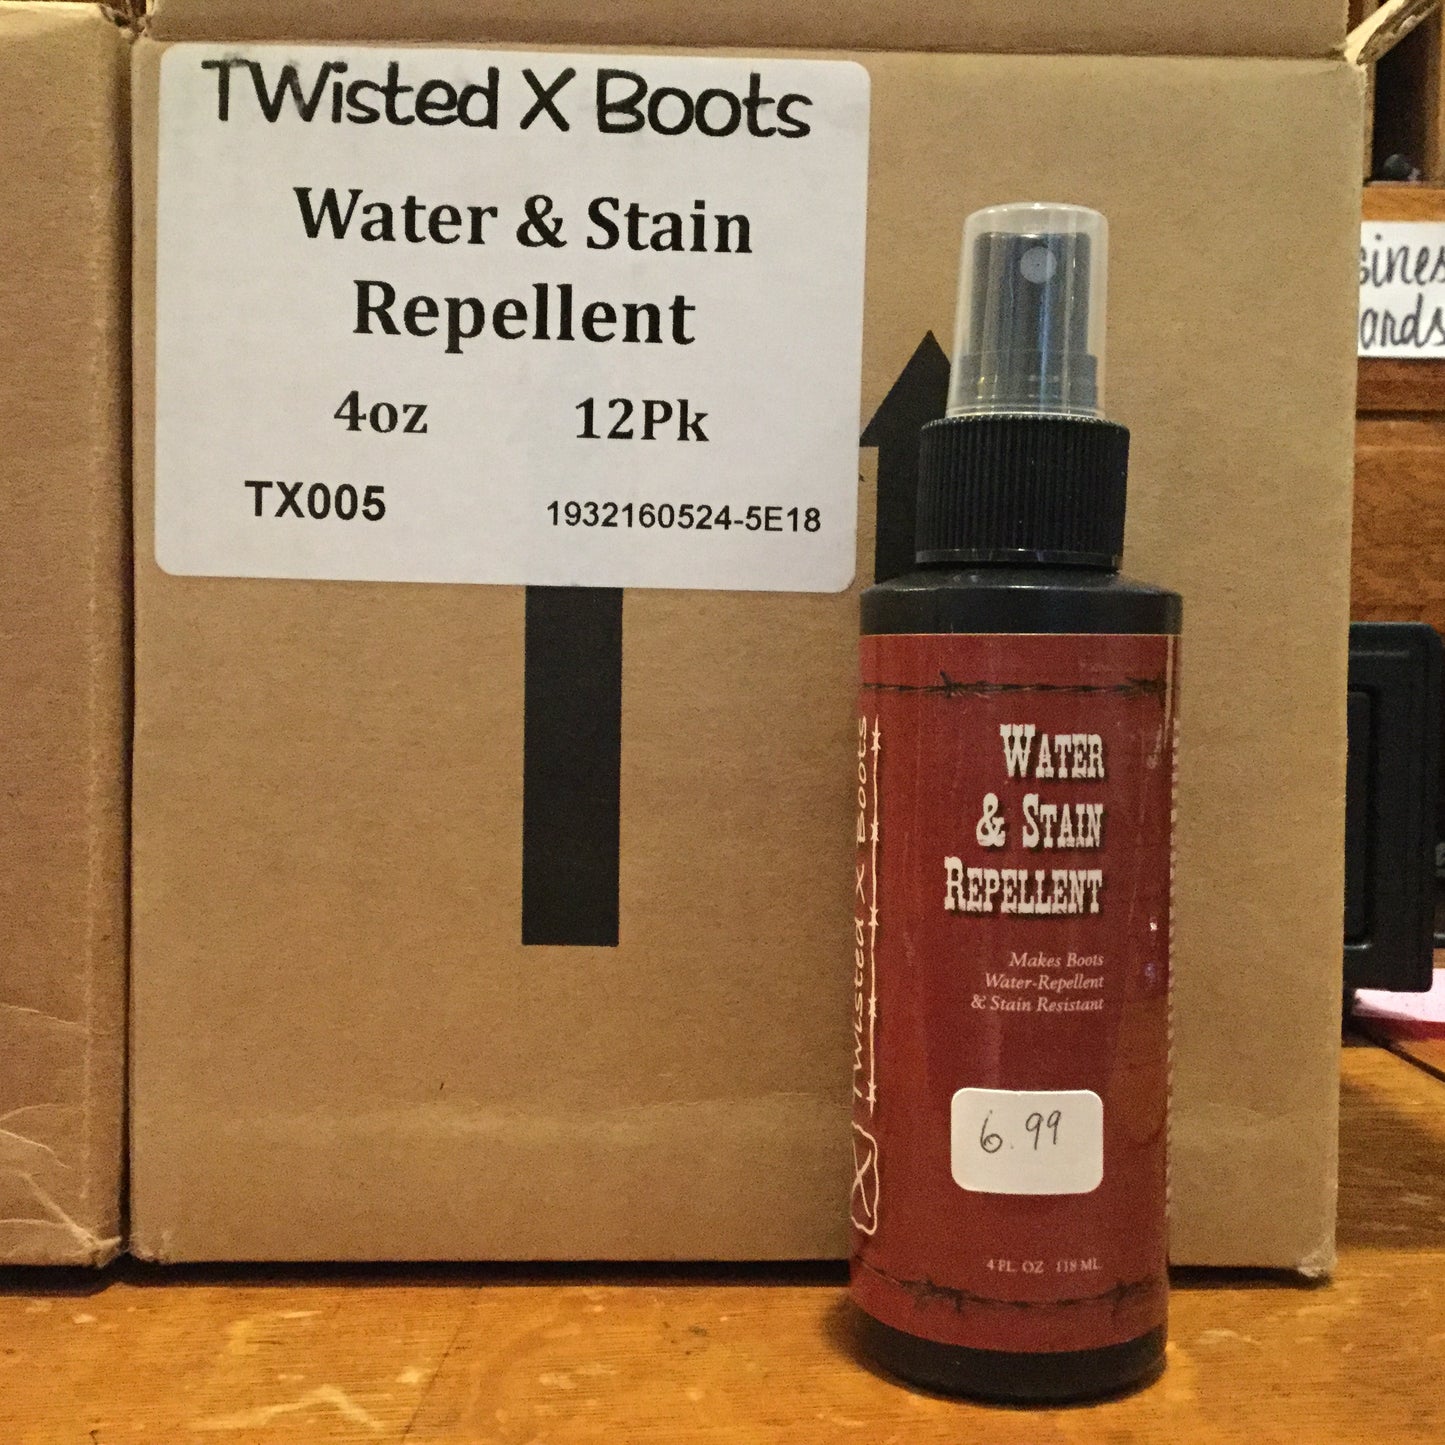 Twisted X Boots Water & Stain Repellent Boot Care